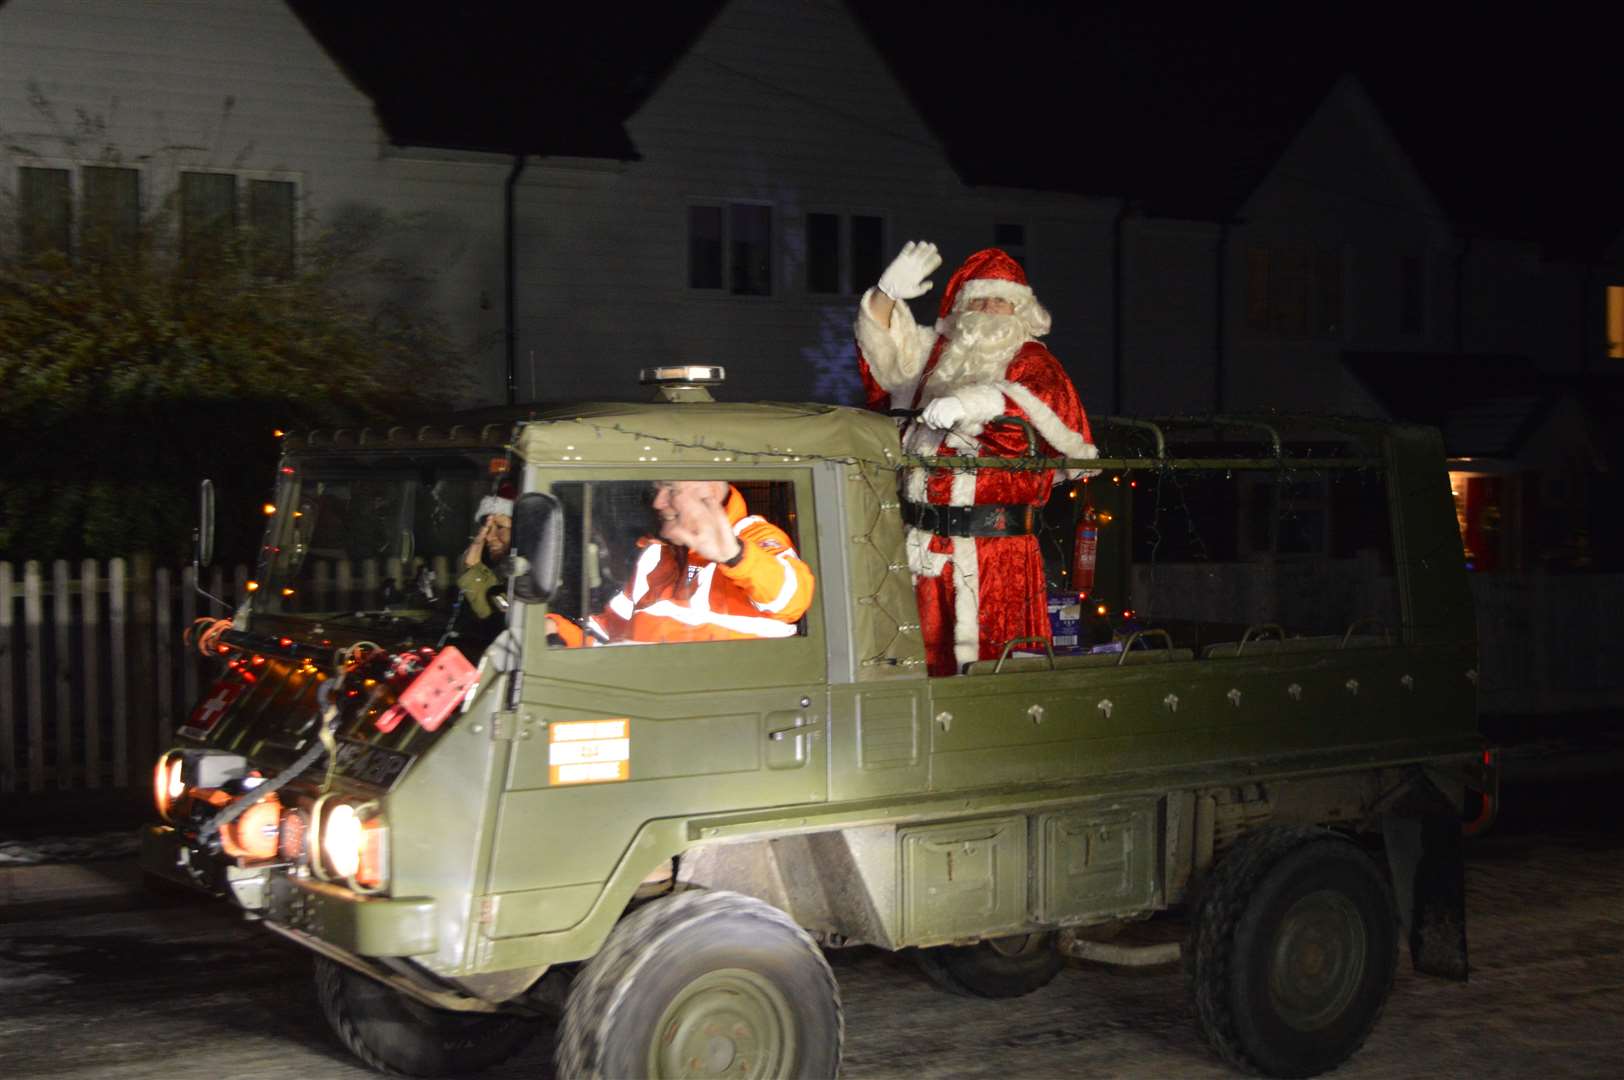 Santa went around in a decorated vehicle. Picture: SE4x4R